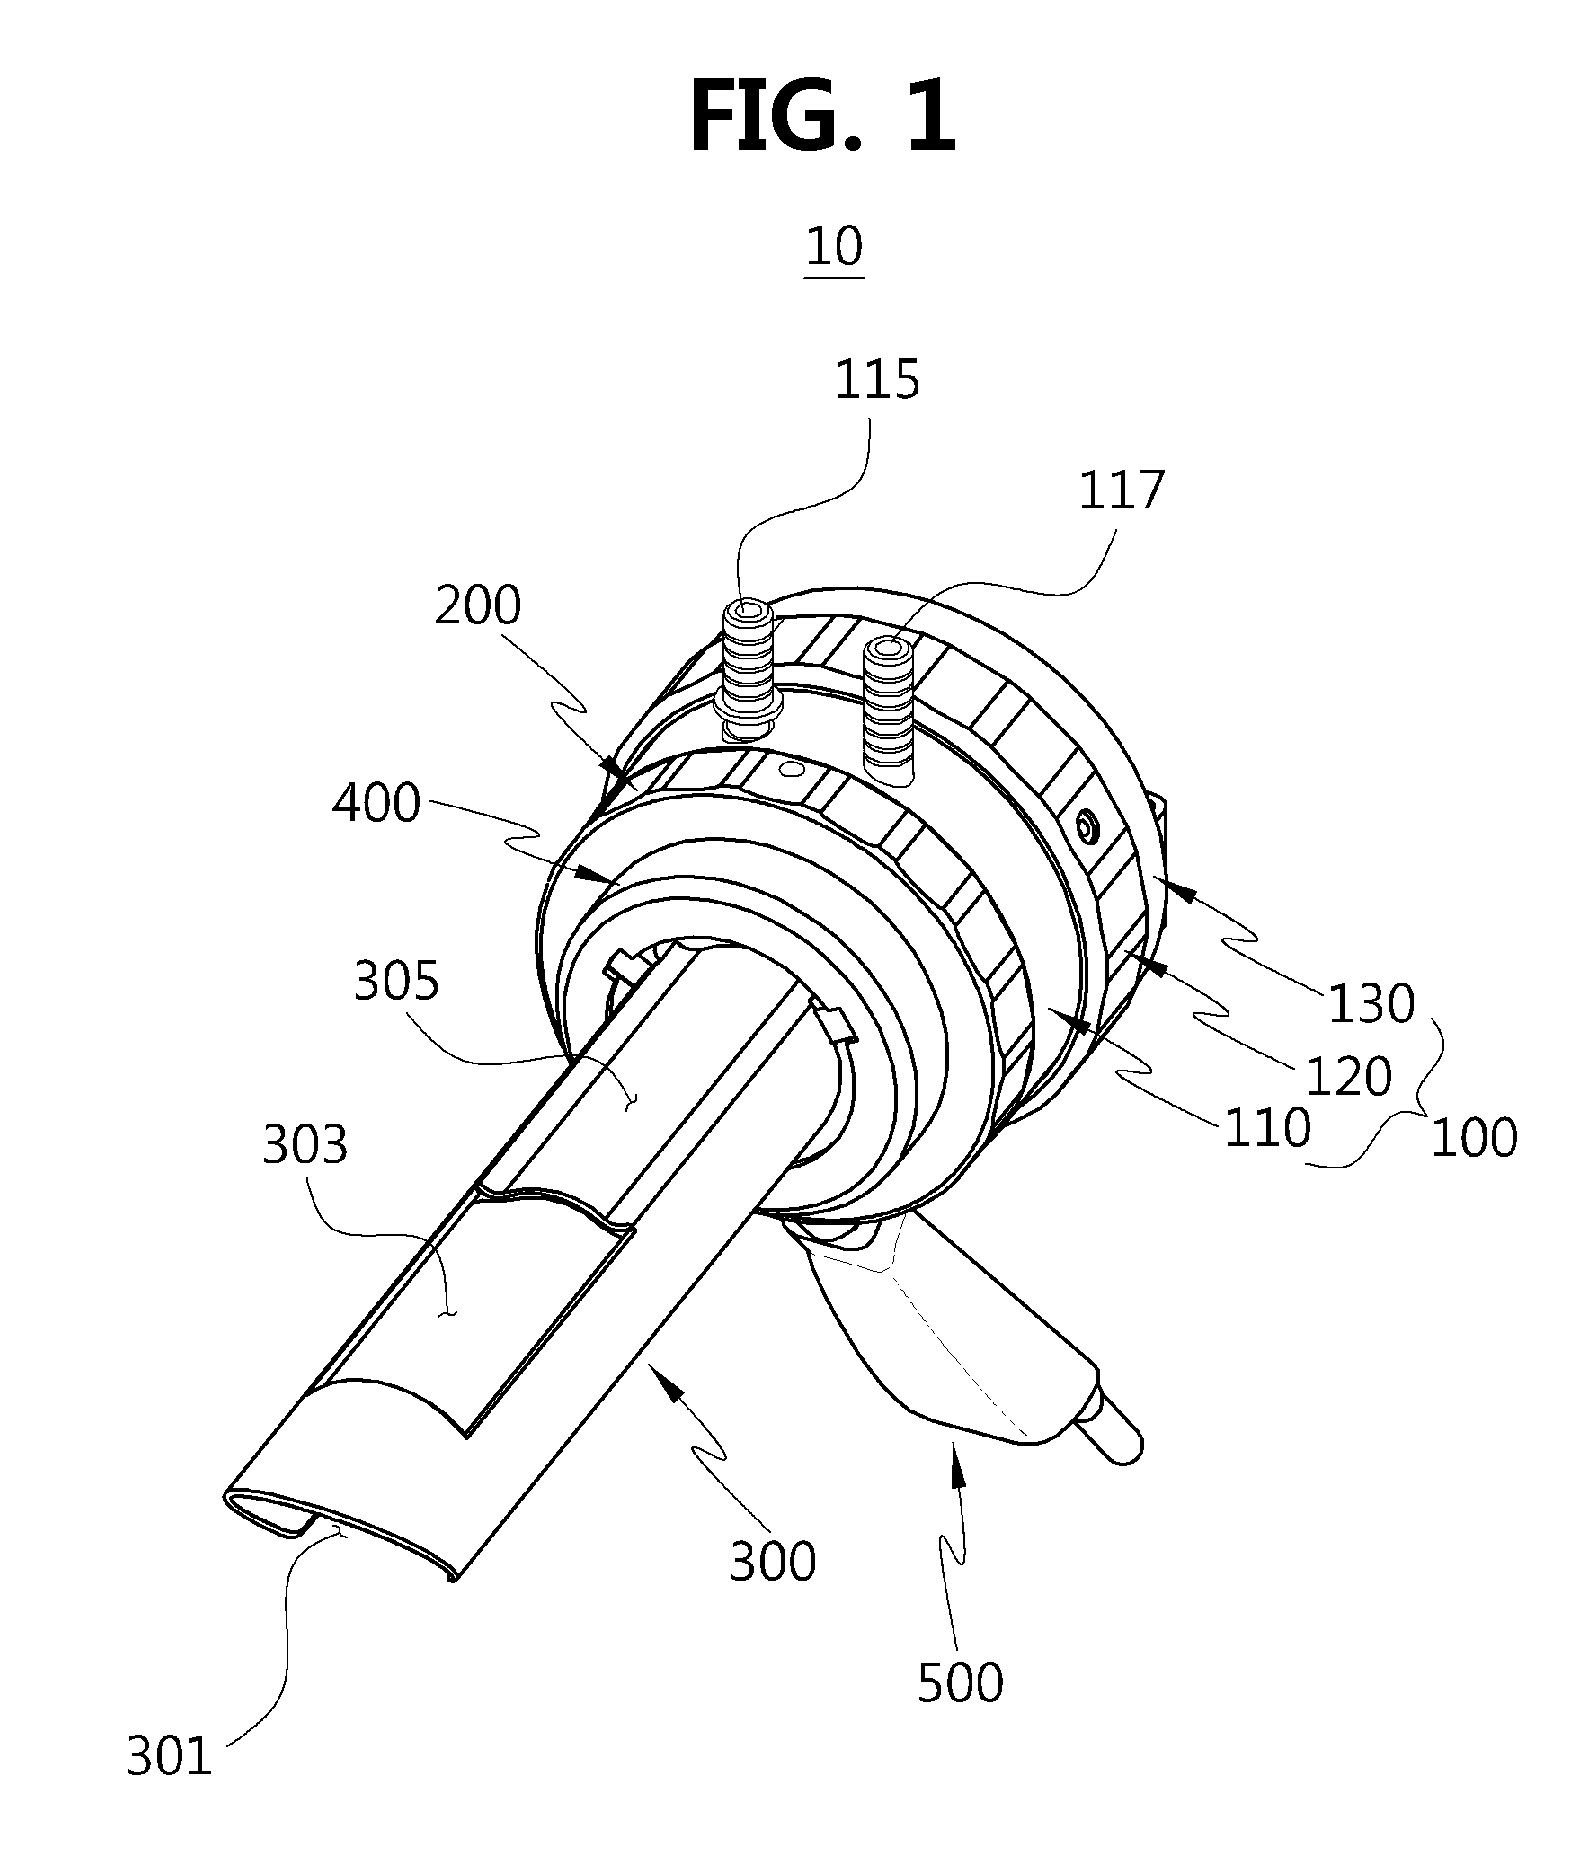 Surgical apparatus for transanal endoscopic microsurgery